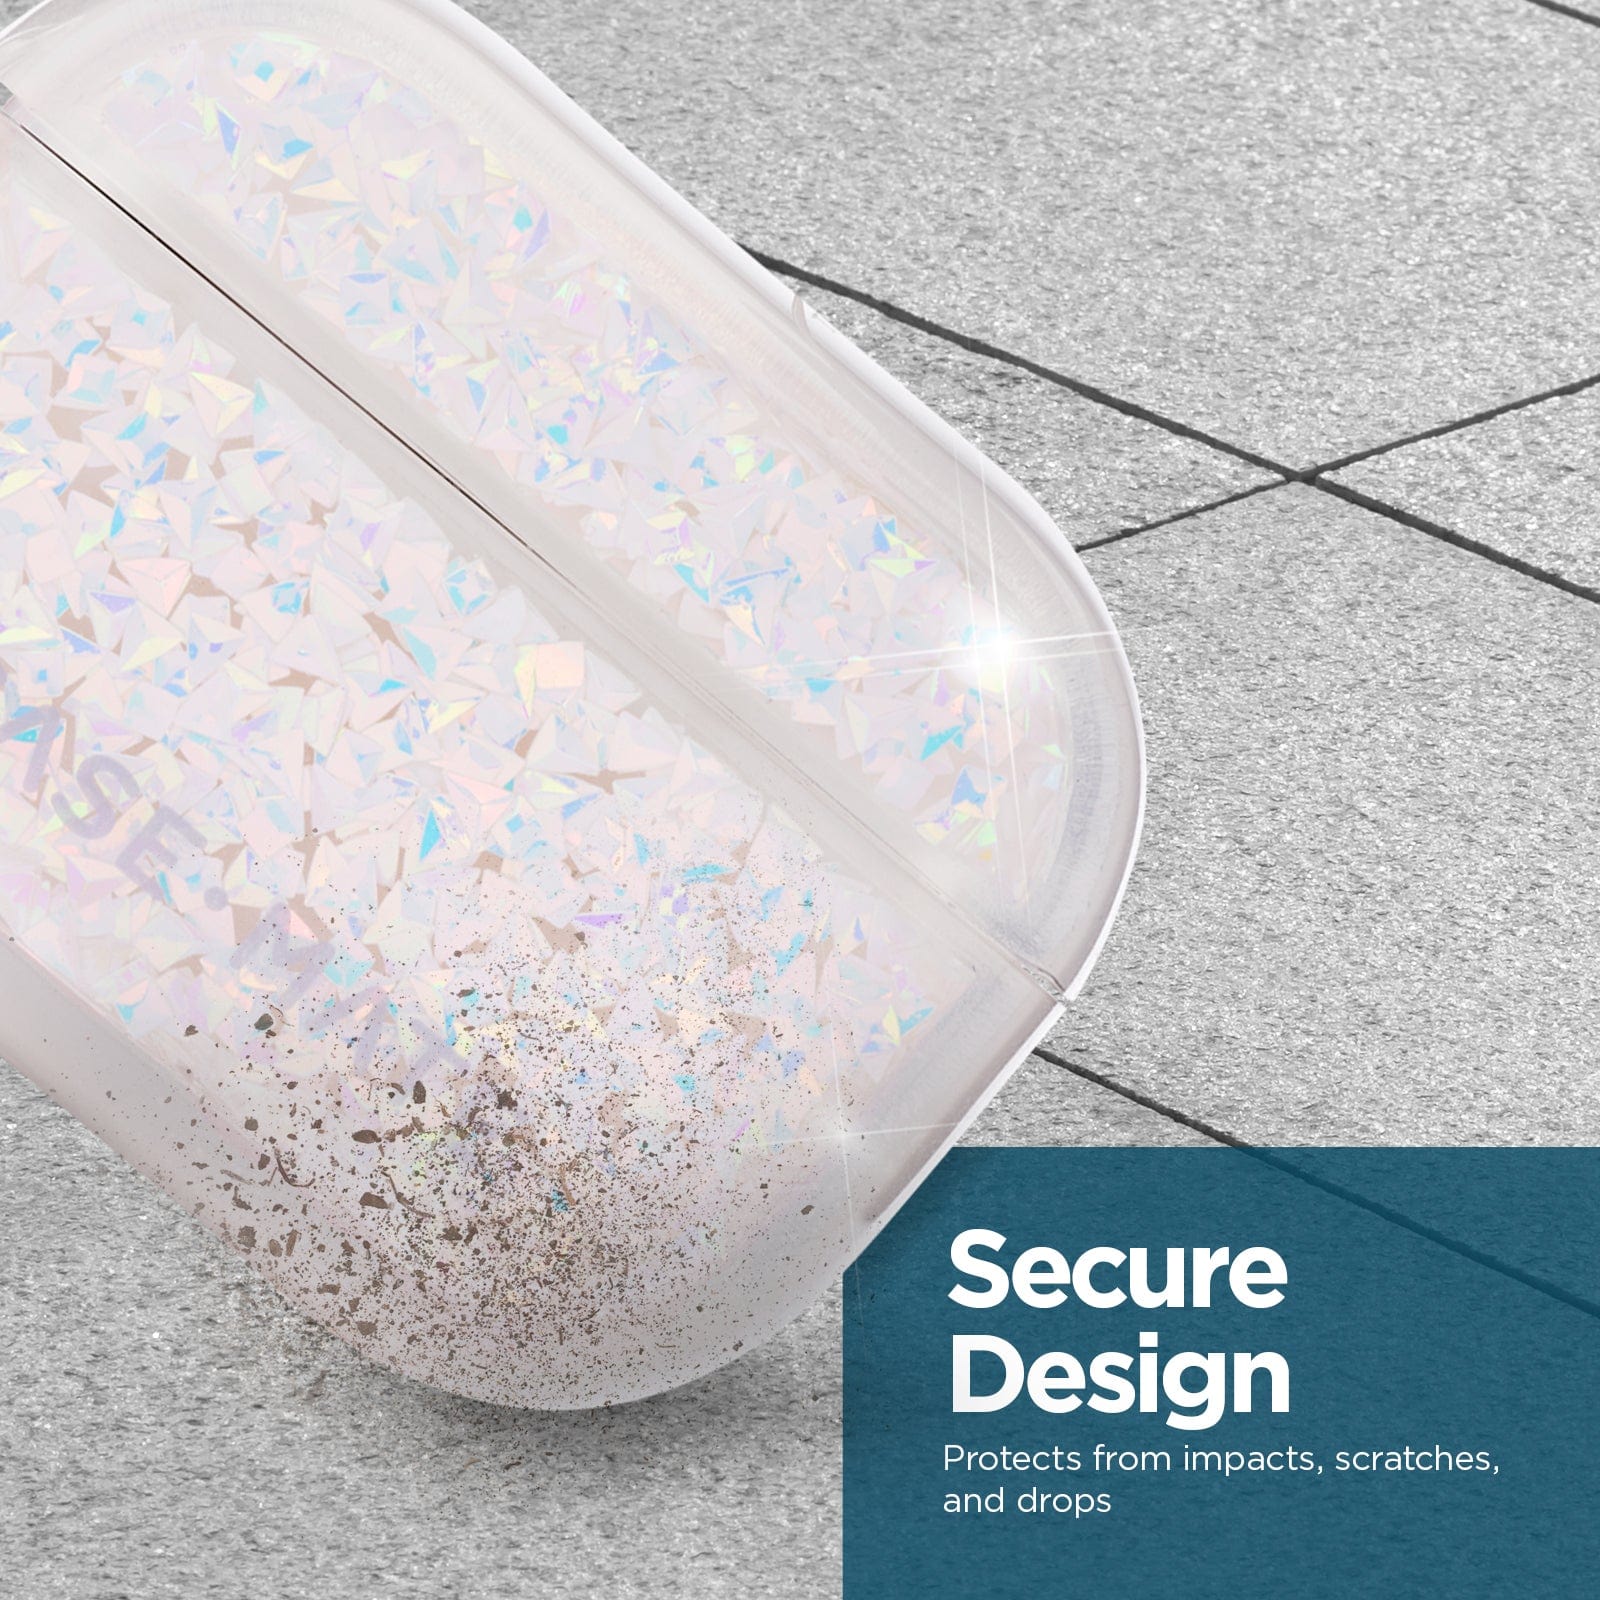 SECURE DESIGN PROTECTS FROM IMPACTS, SCRATCHES, AND DROPS